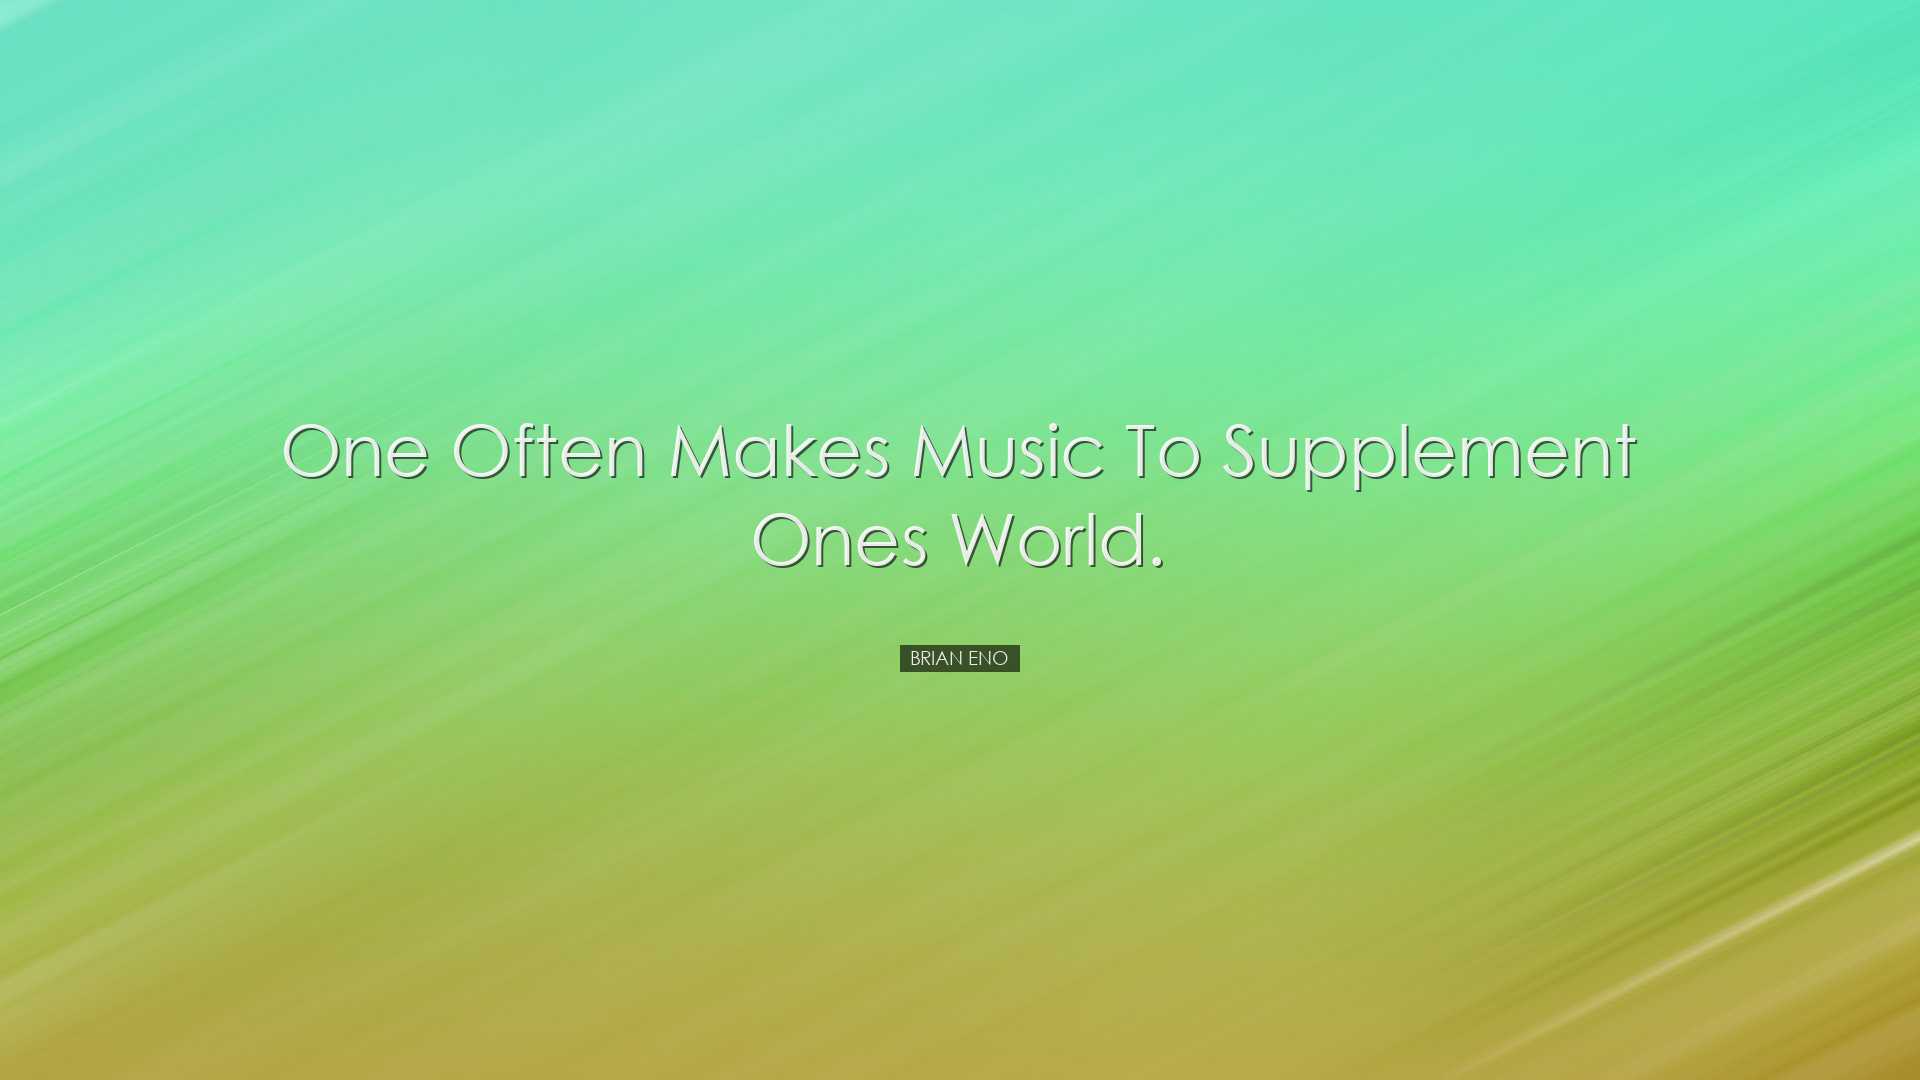 One often makes music to supplement ones world. - Brian Eno